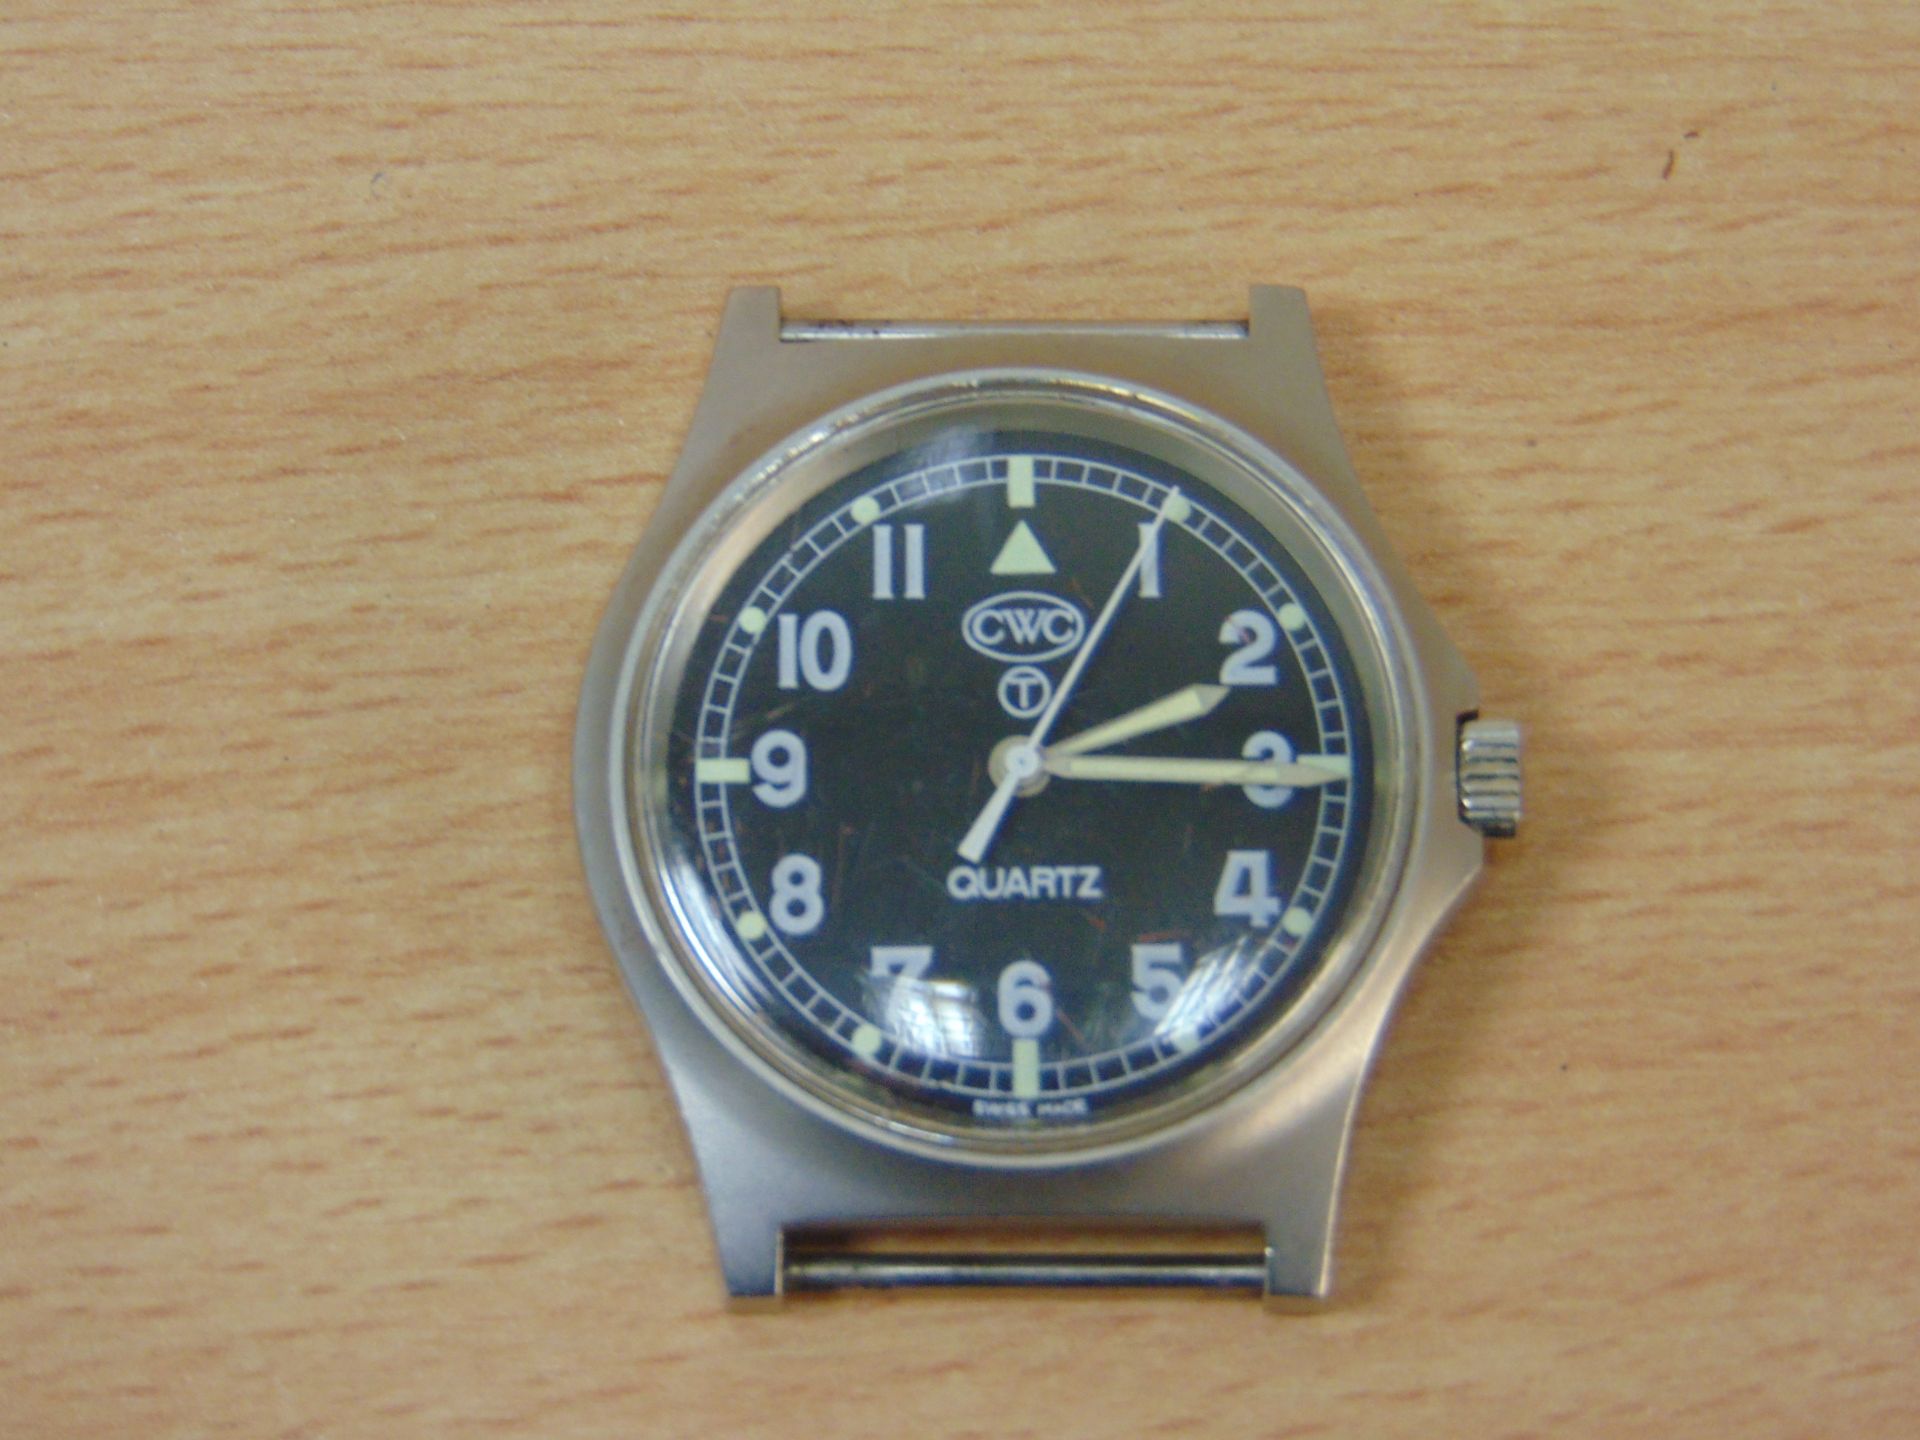 VERY RARE 0552 CWC ROYAL MARINES ISSUE SERVICE WATCH DATE 1989 (GULF WAR) - Image 4 of 9